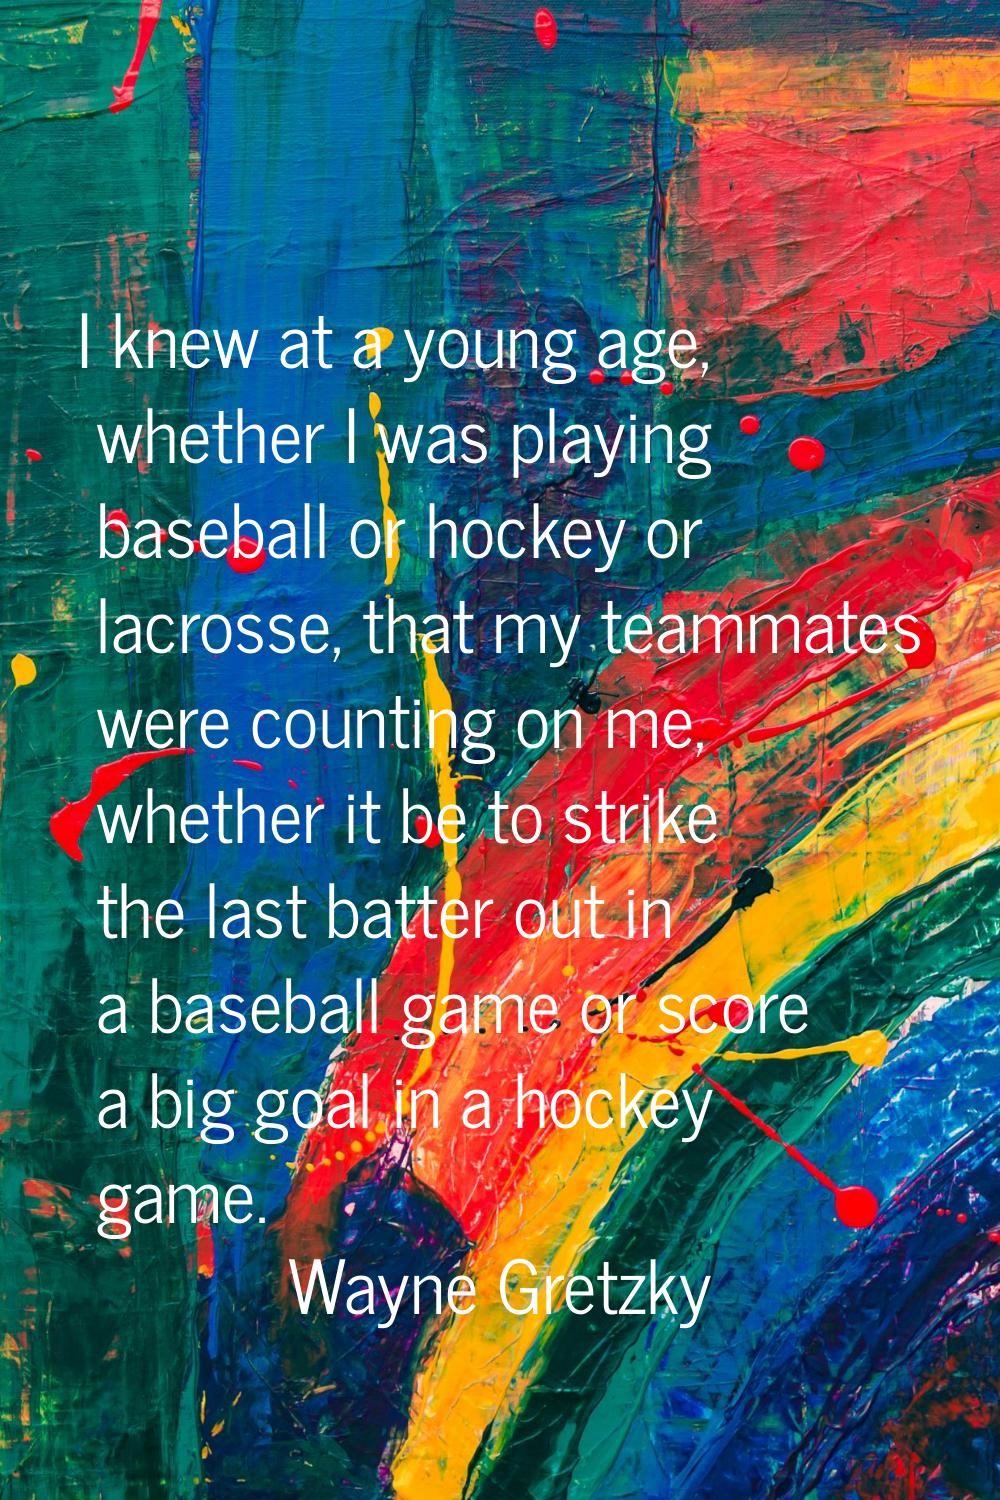 I knew at a young age, whether I was playing baseball or hockey or lacrosse, that my teammates were